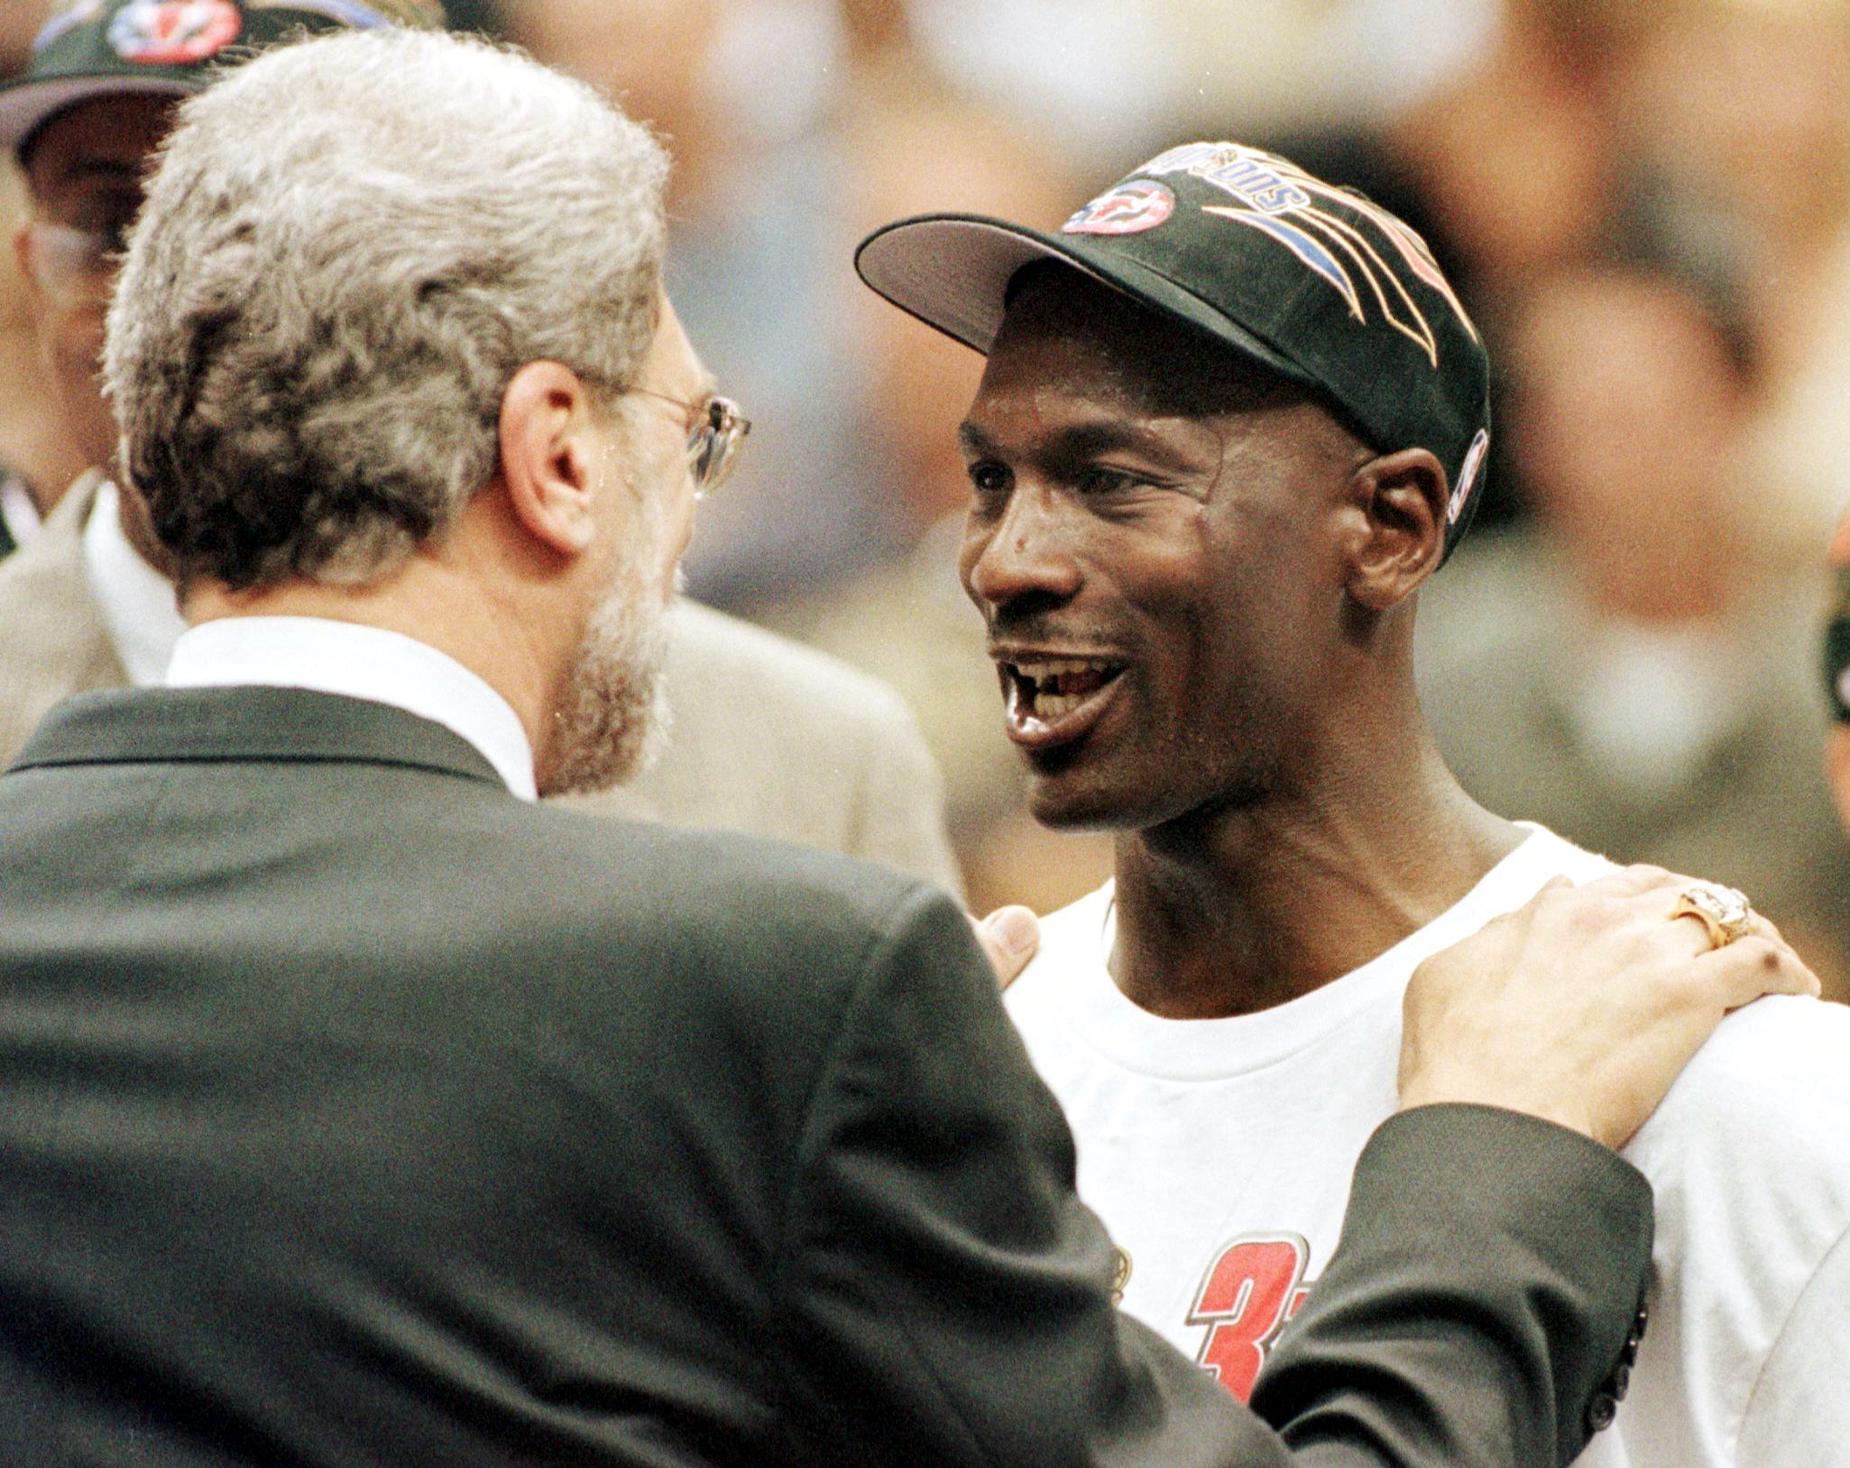 Phil Jackson (L) and Michael Jordan (R) both found incredible success with the Chicago Bulls.